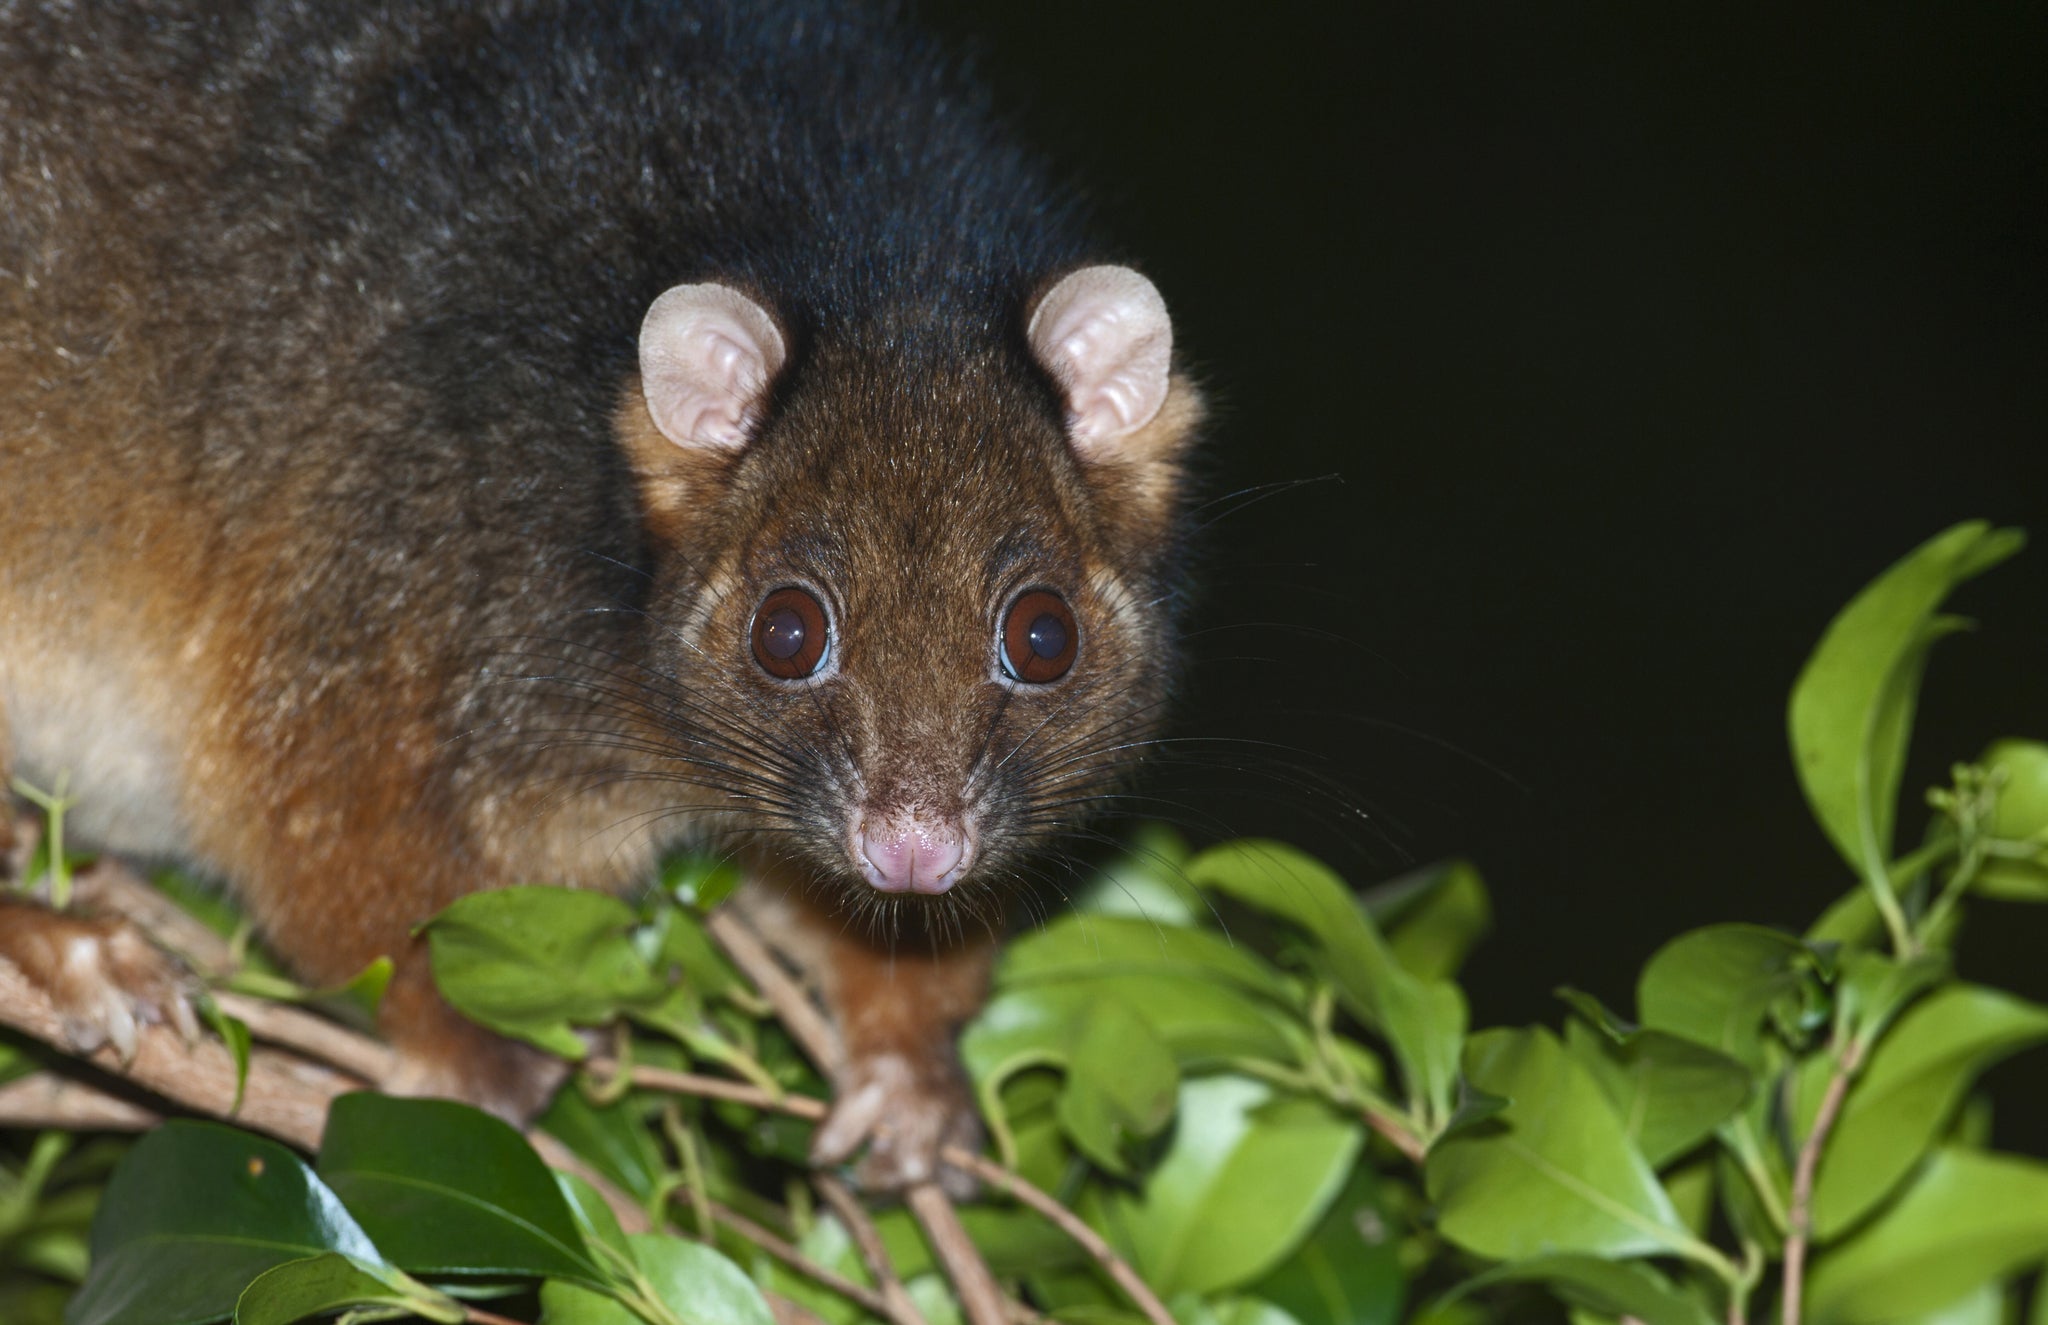 Possum faeces may contain a bacteria which causes flesh-eating ulcers in humans